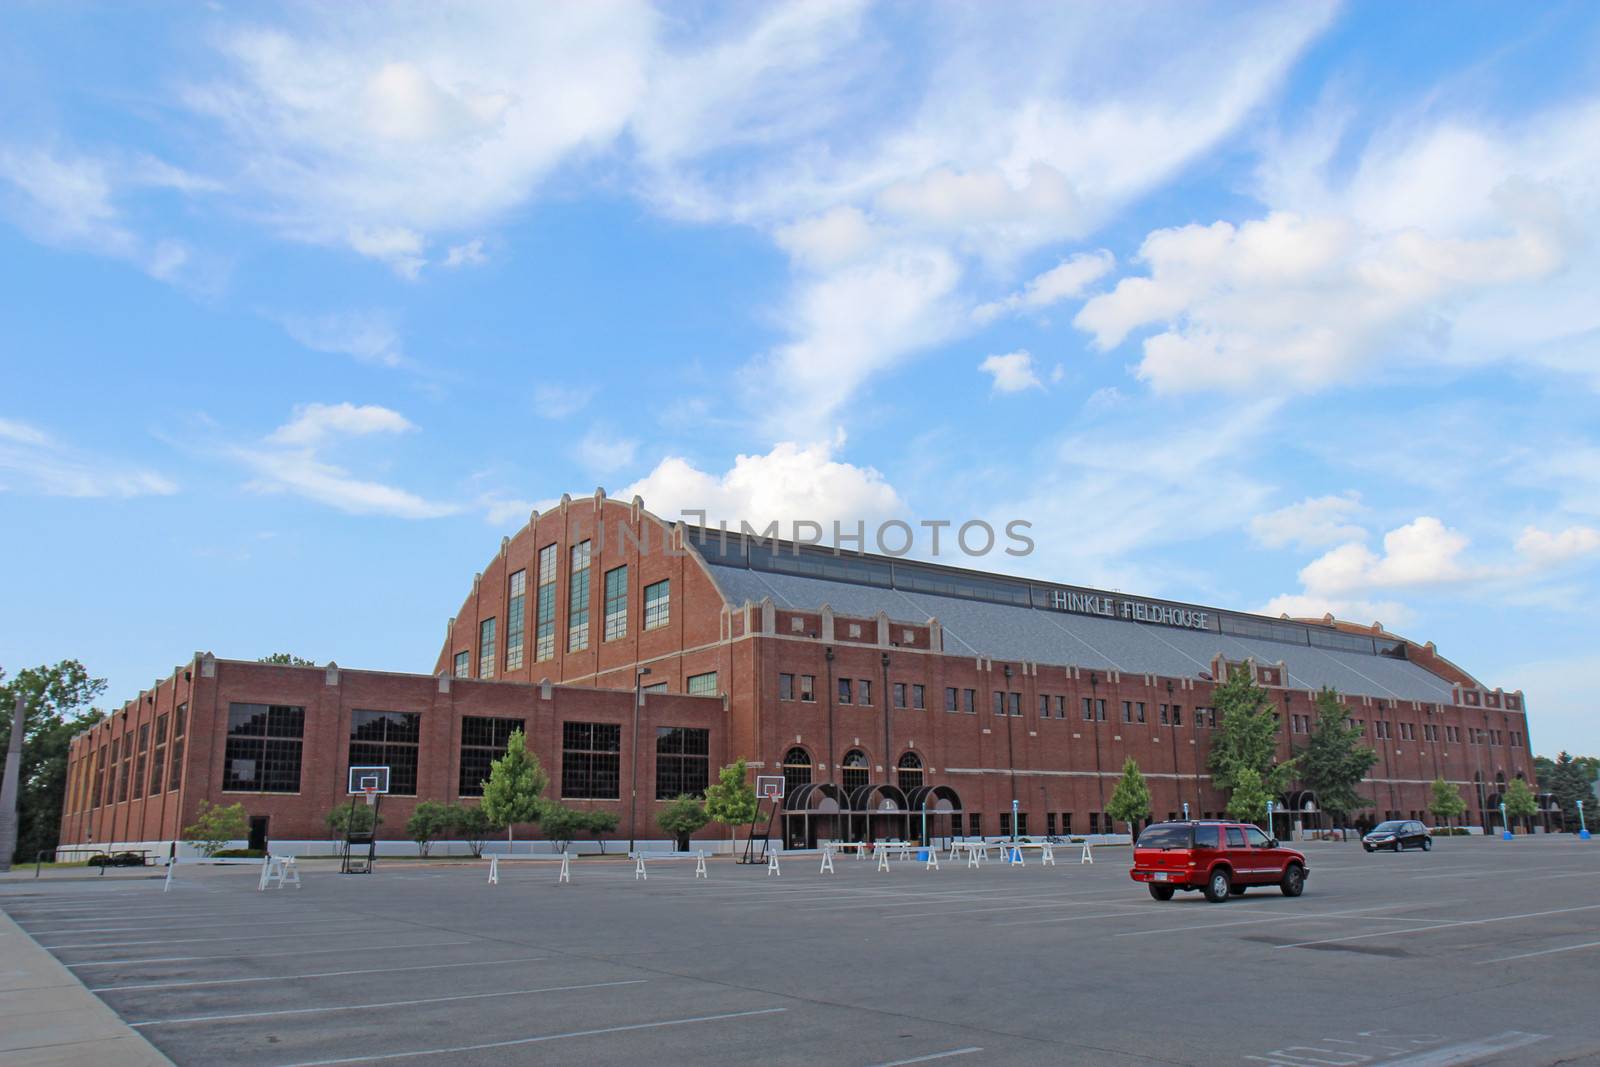 Hinkle Fieldhouse on the Butler University campus by sgoodwin4813